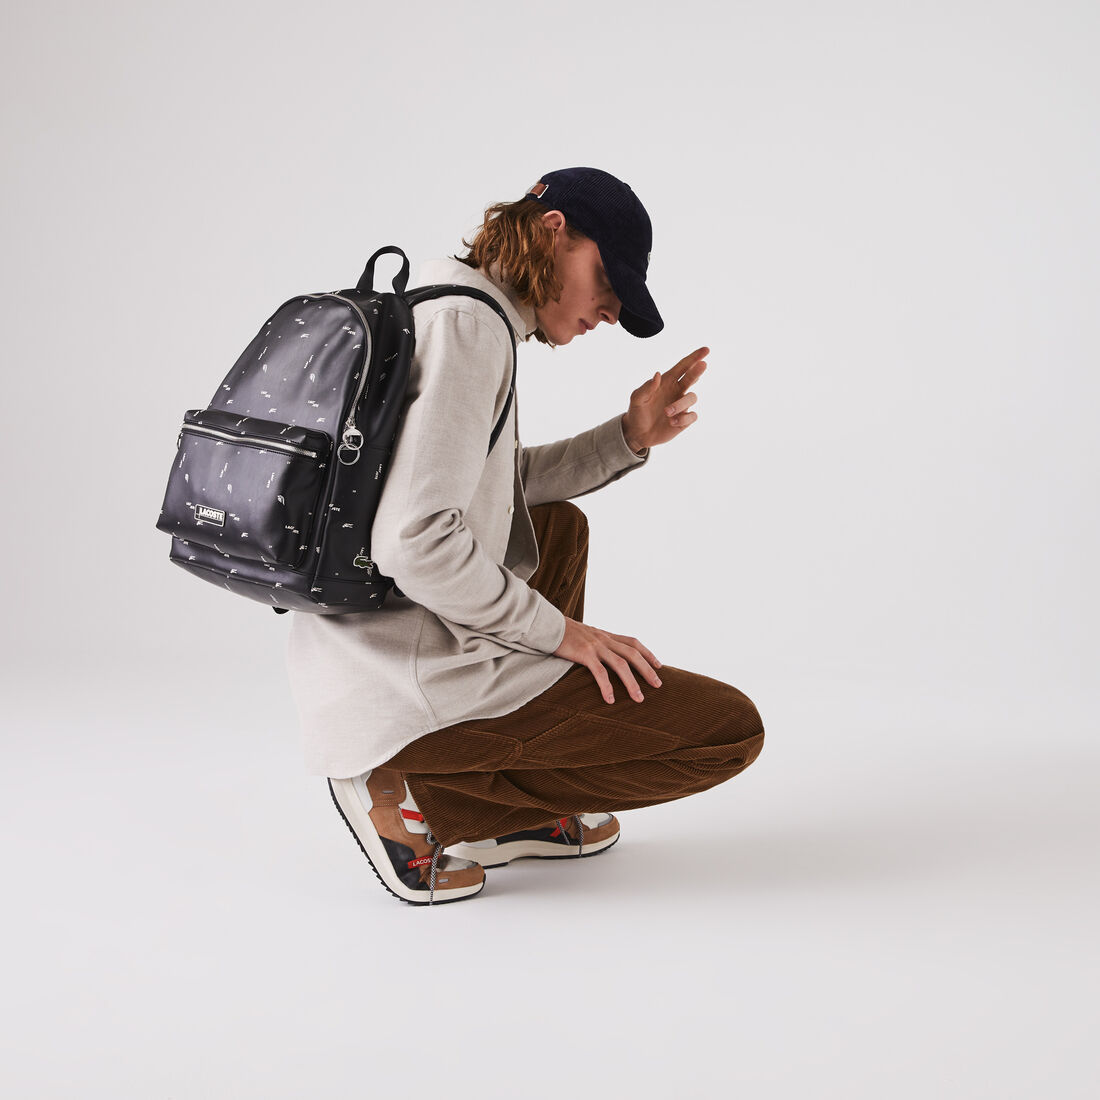 Men's LCST Printed Coated Canvas Backpack